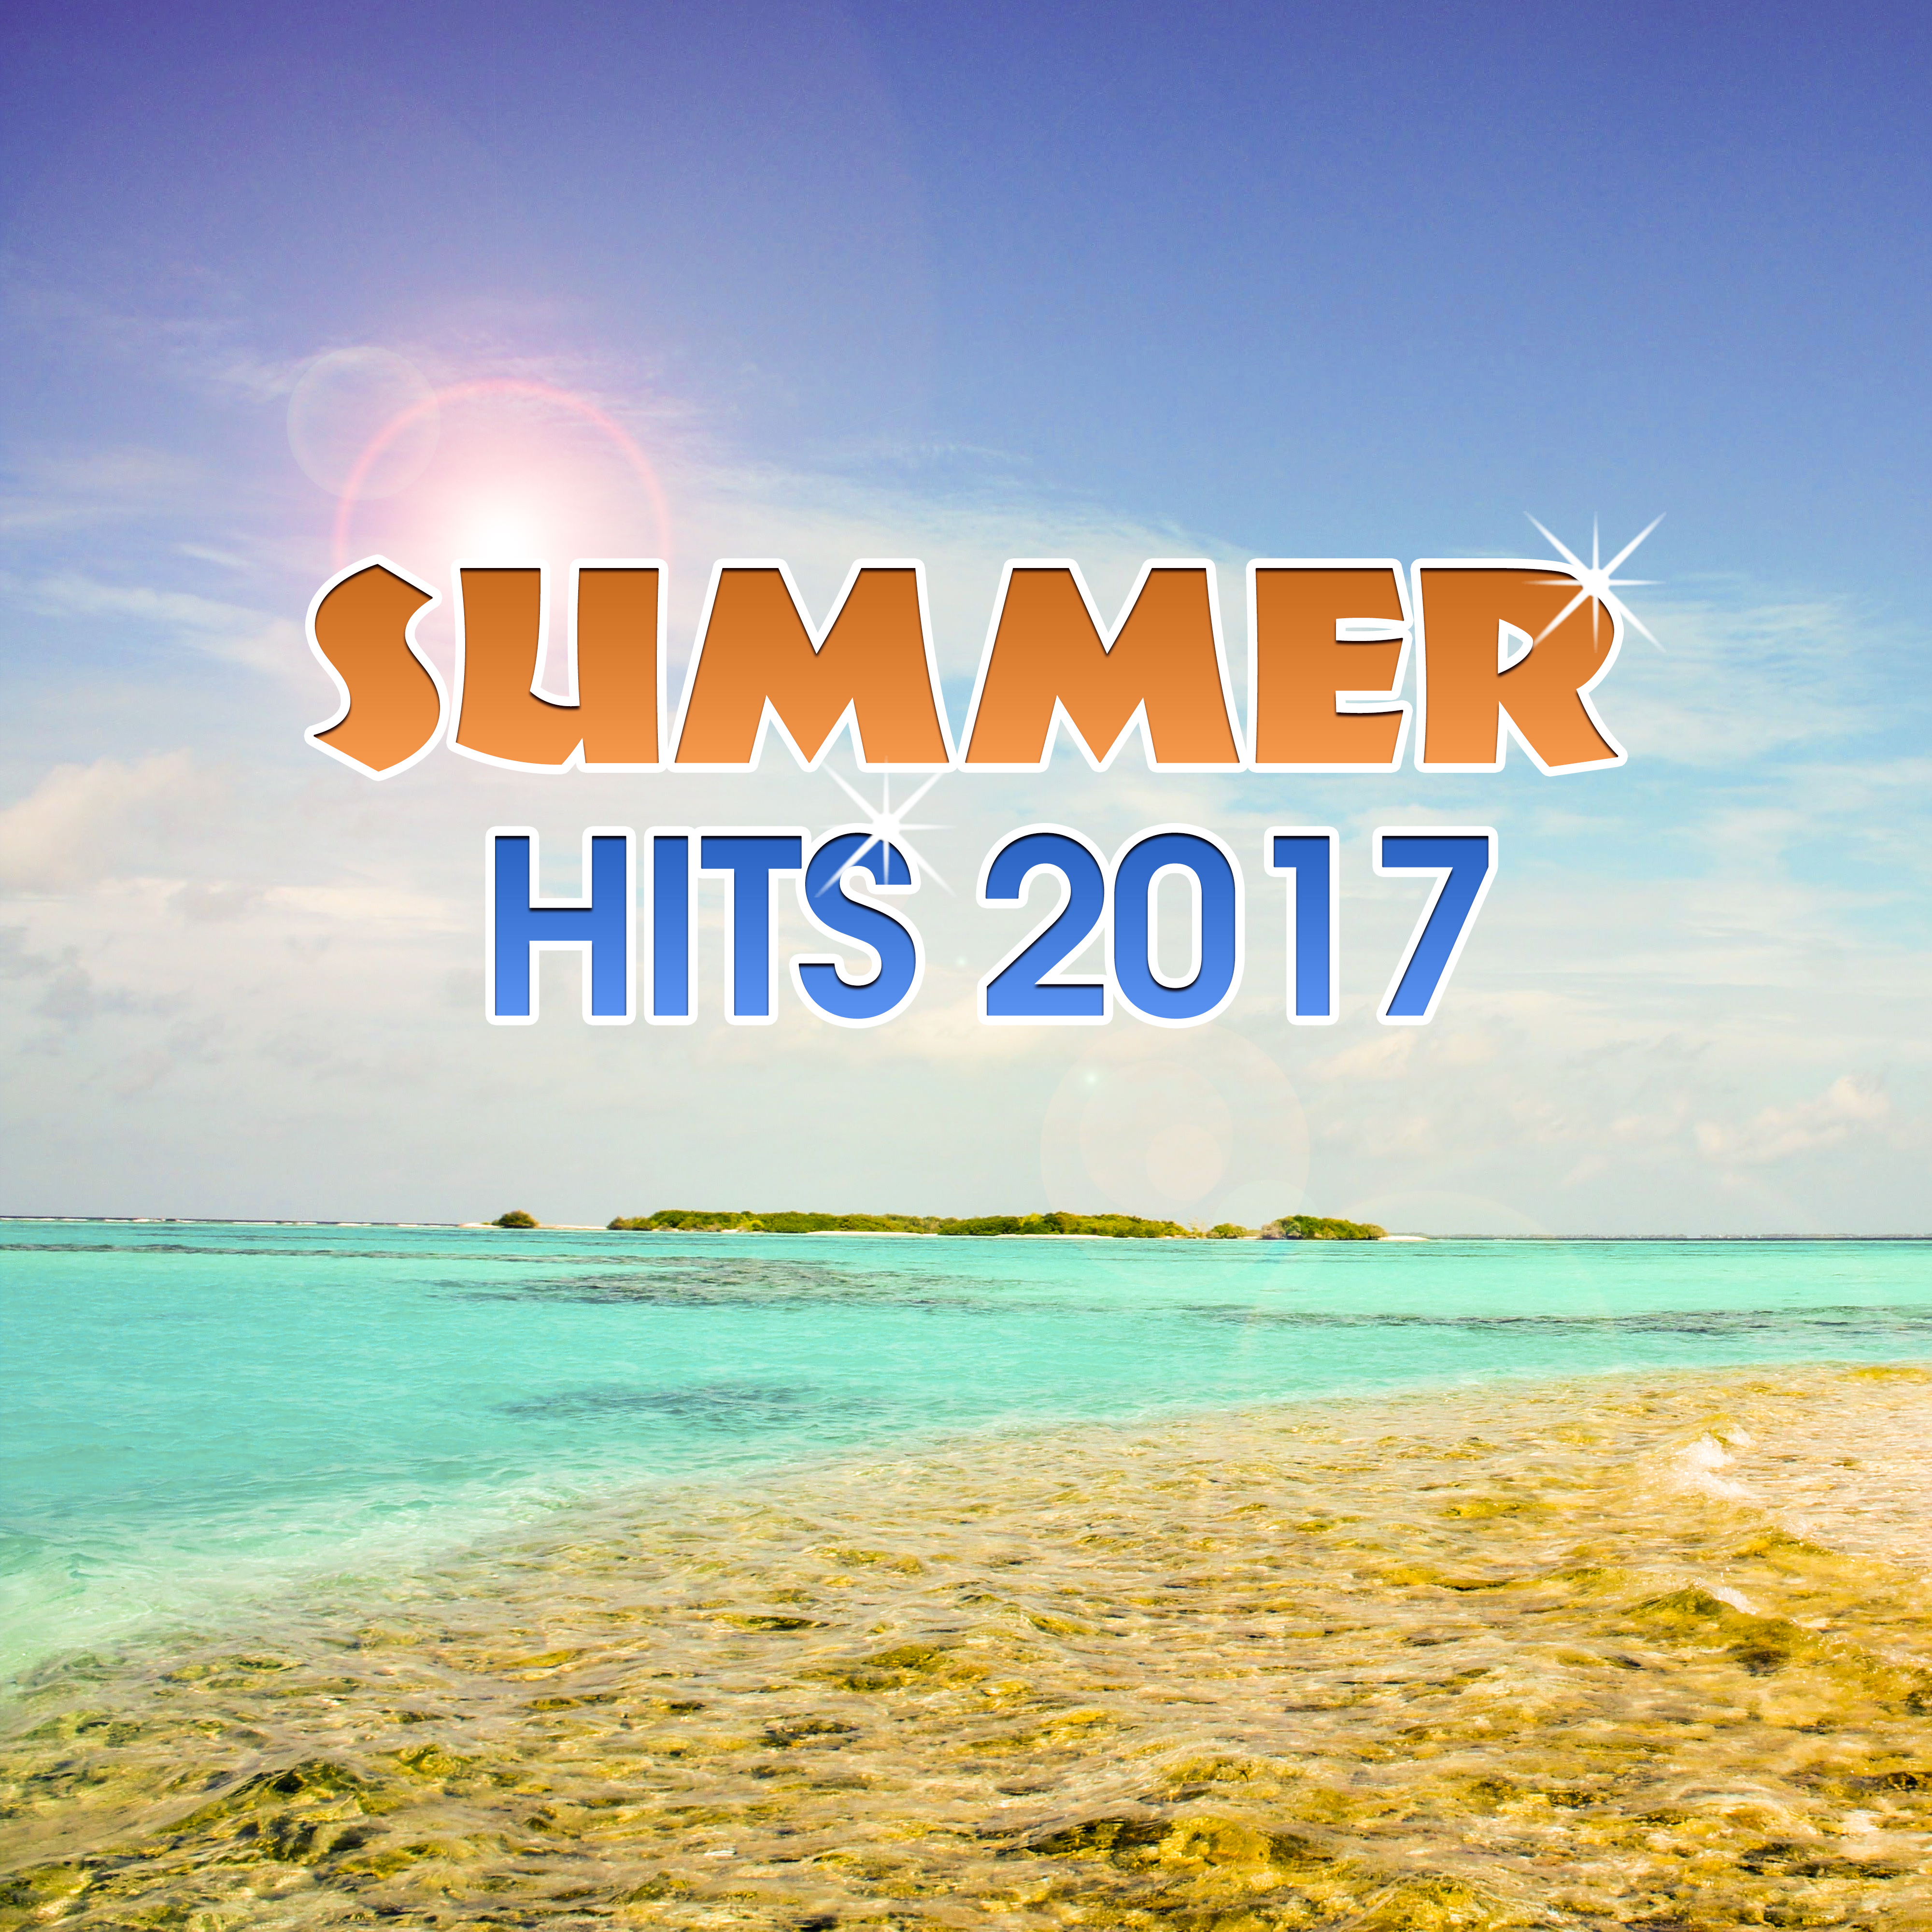 Summer Hits 2017  Ibiza Chill Out Party, Dancefloor, Beach Party, Summer Chill, Chillout Hits, Ibiza Lounge Club